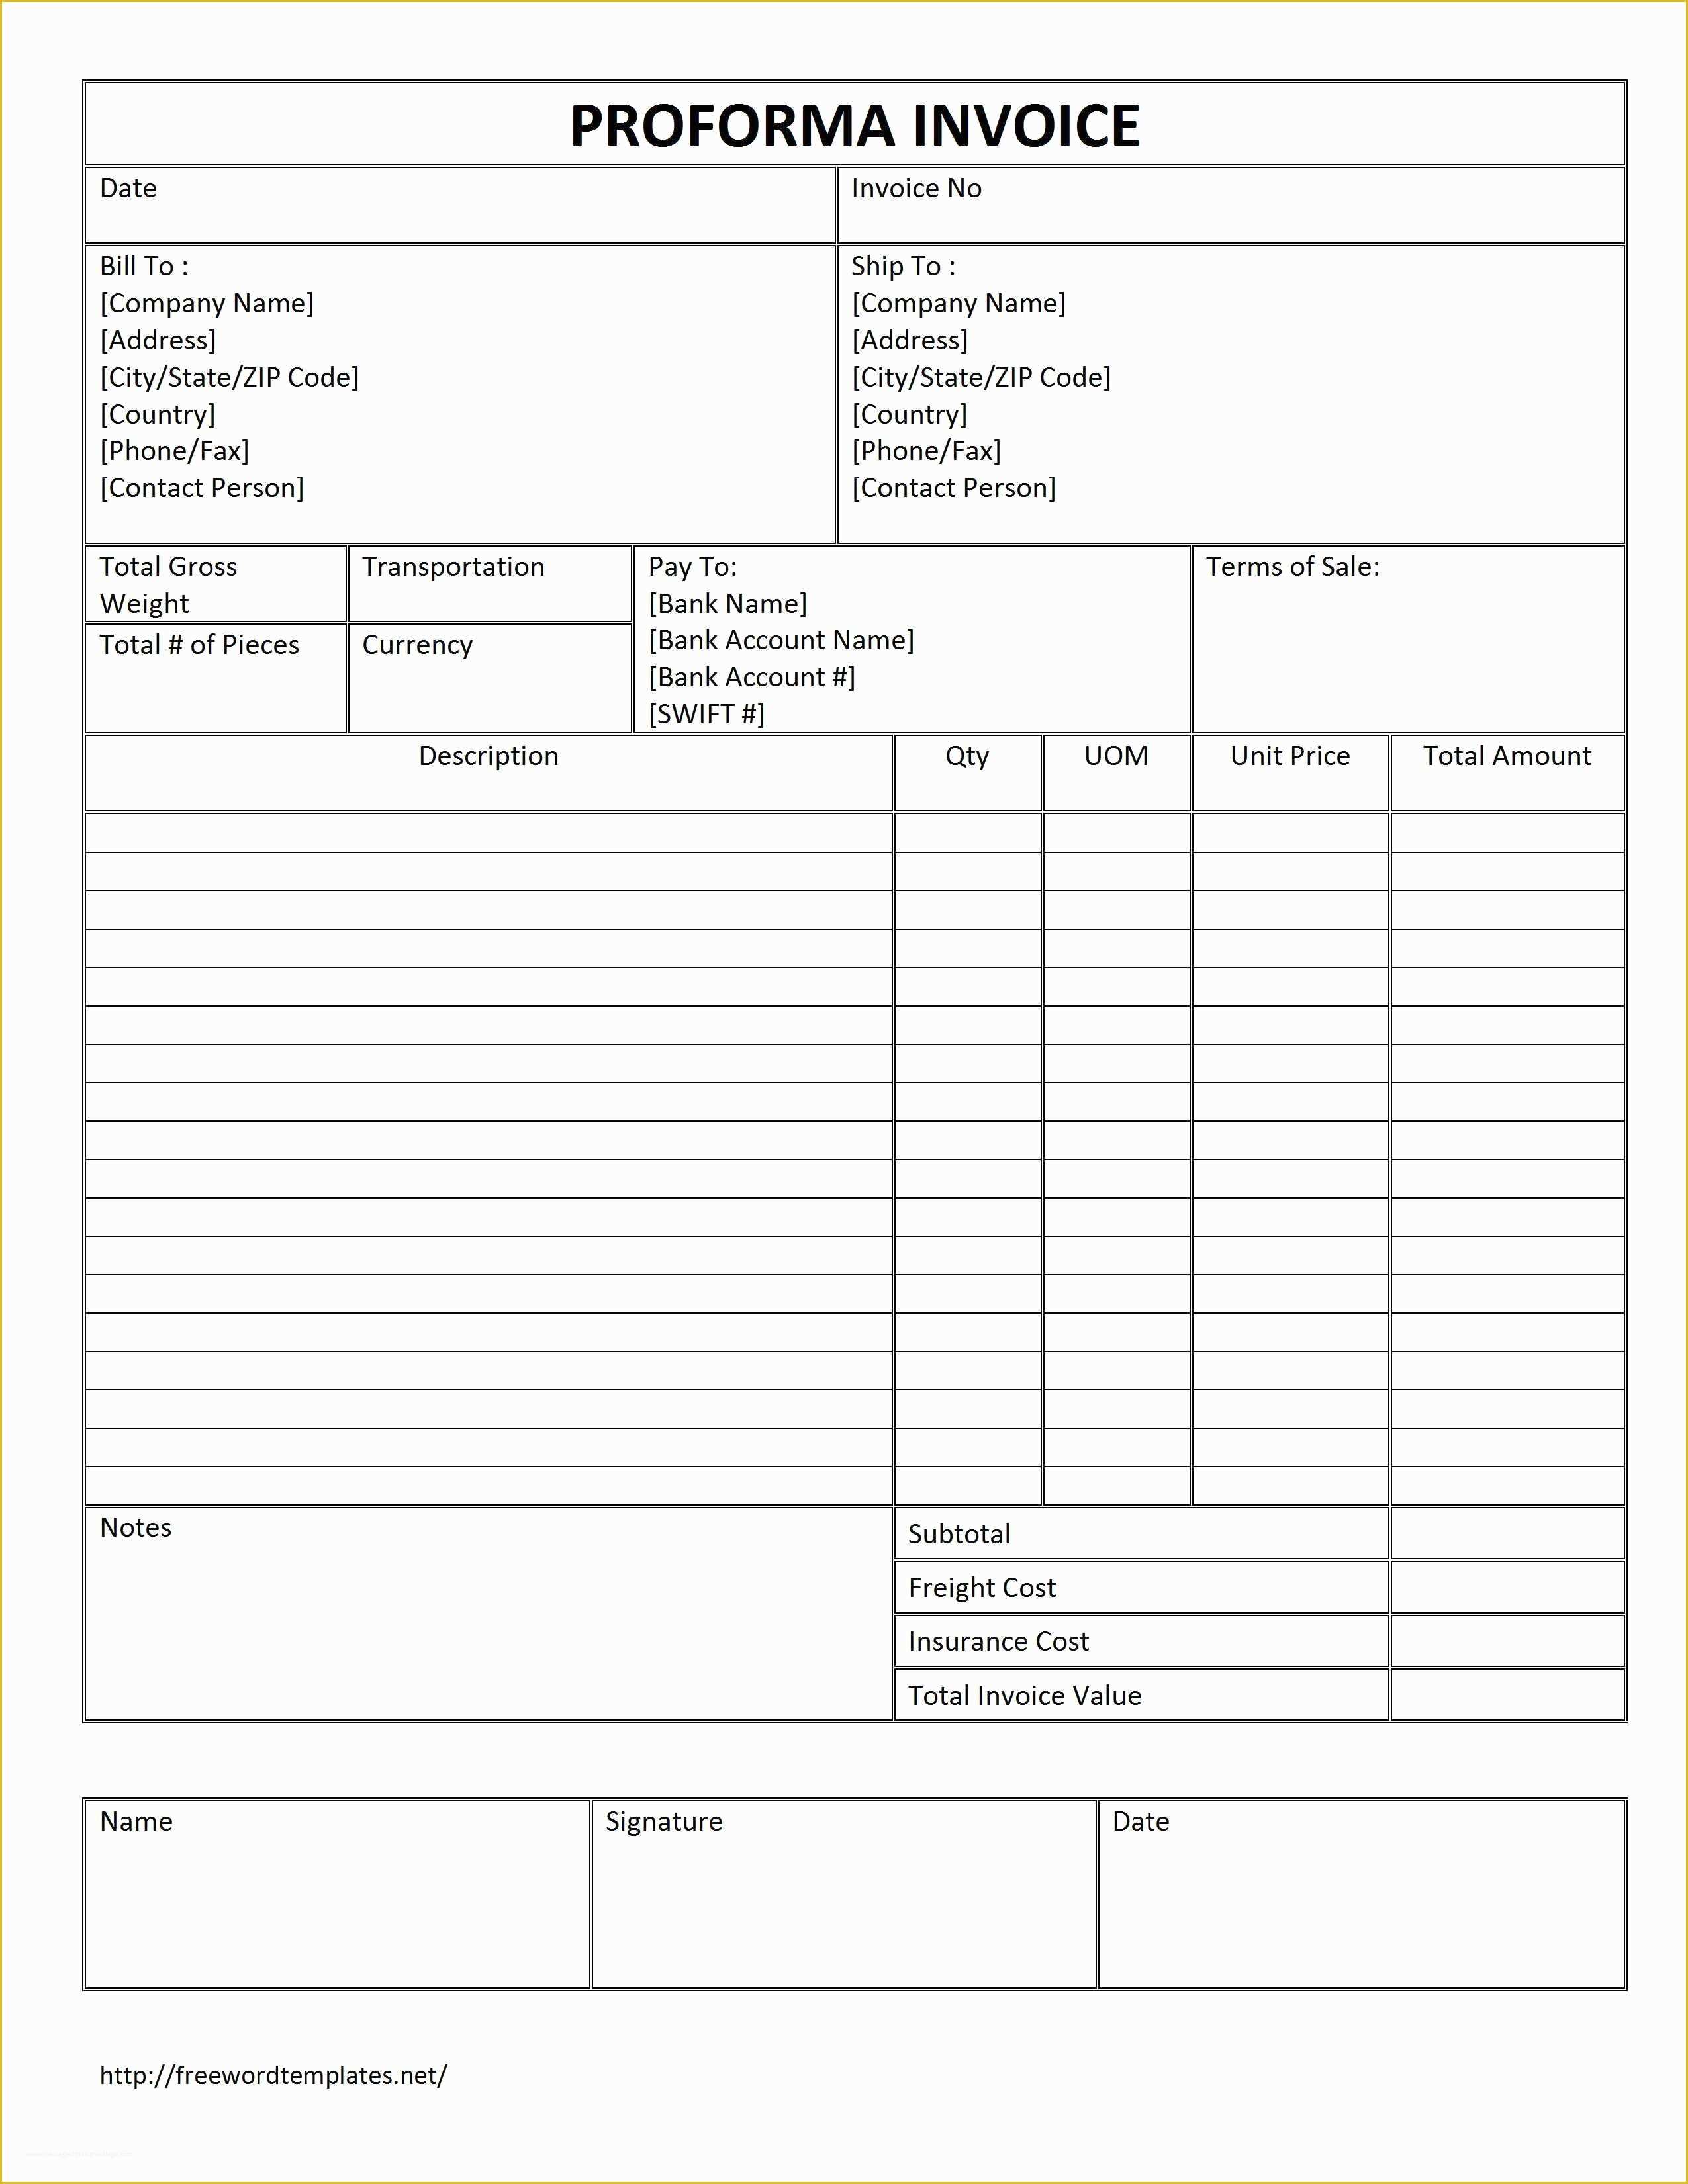 Invoice Template Excel Download Free Of Proforma Invoice Template Free Download Free Proforma